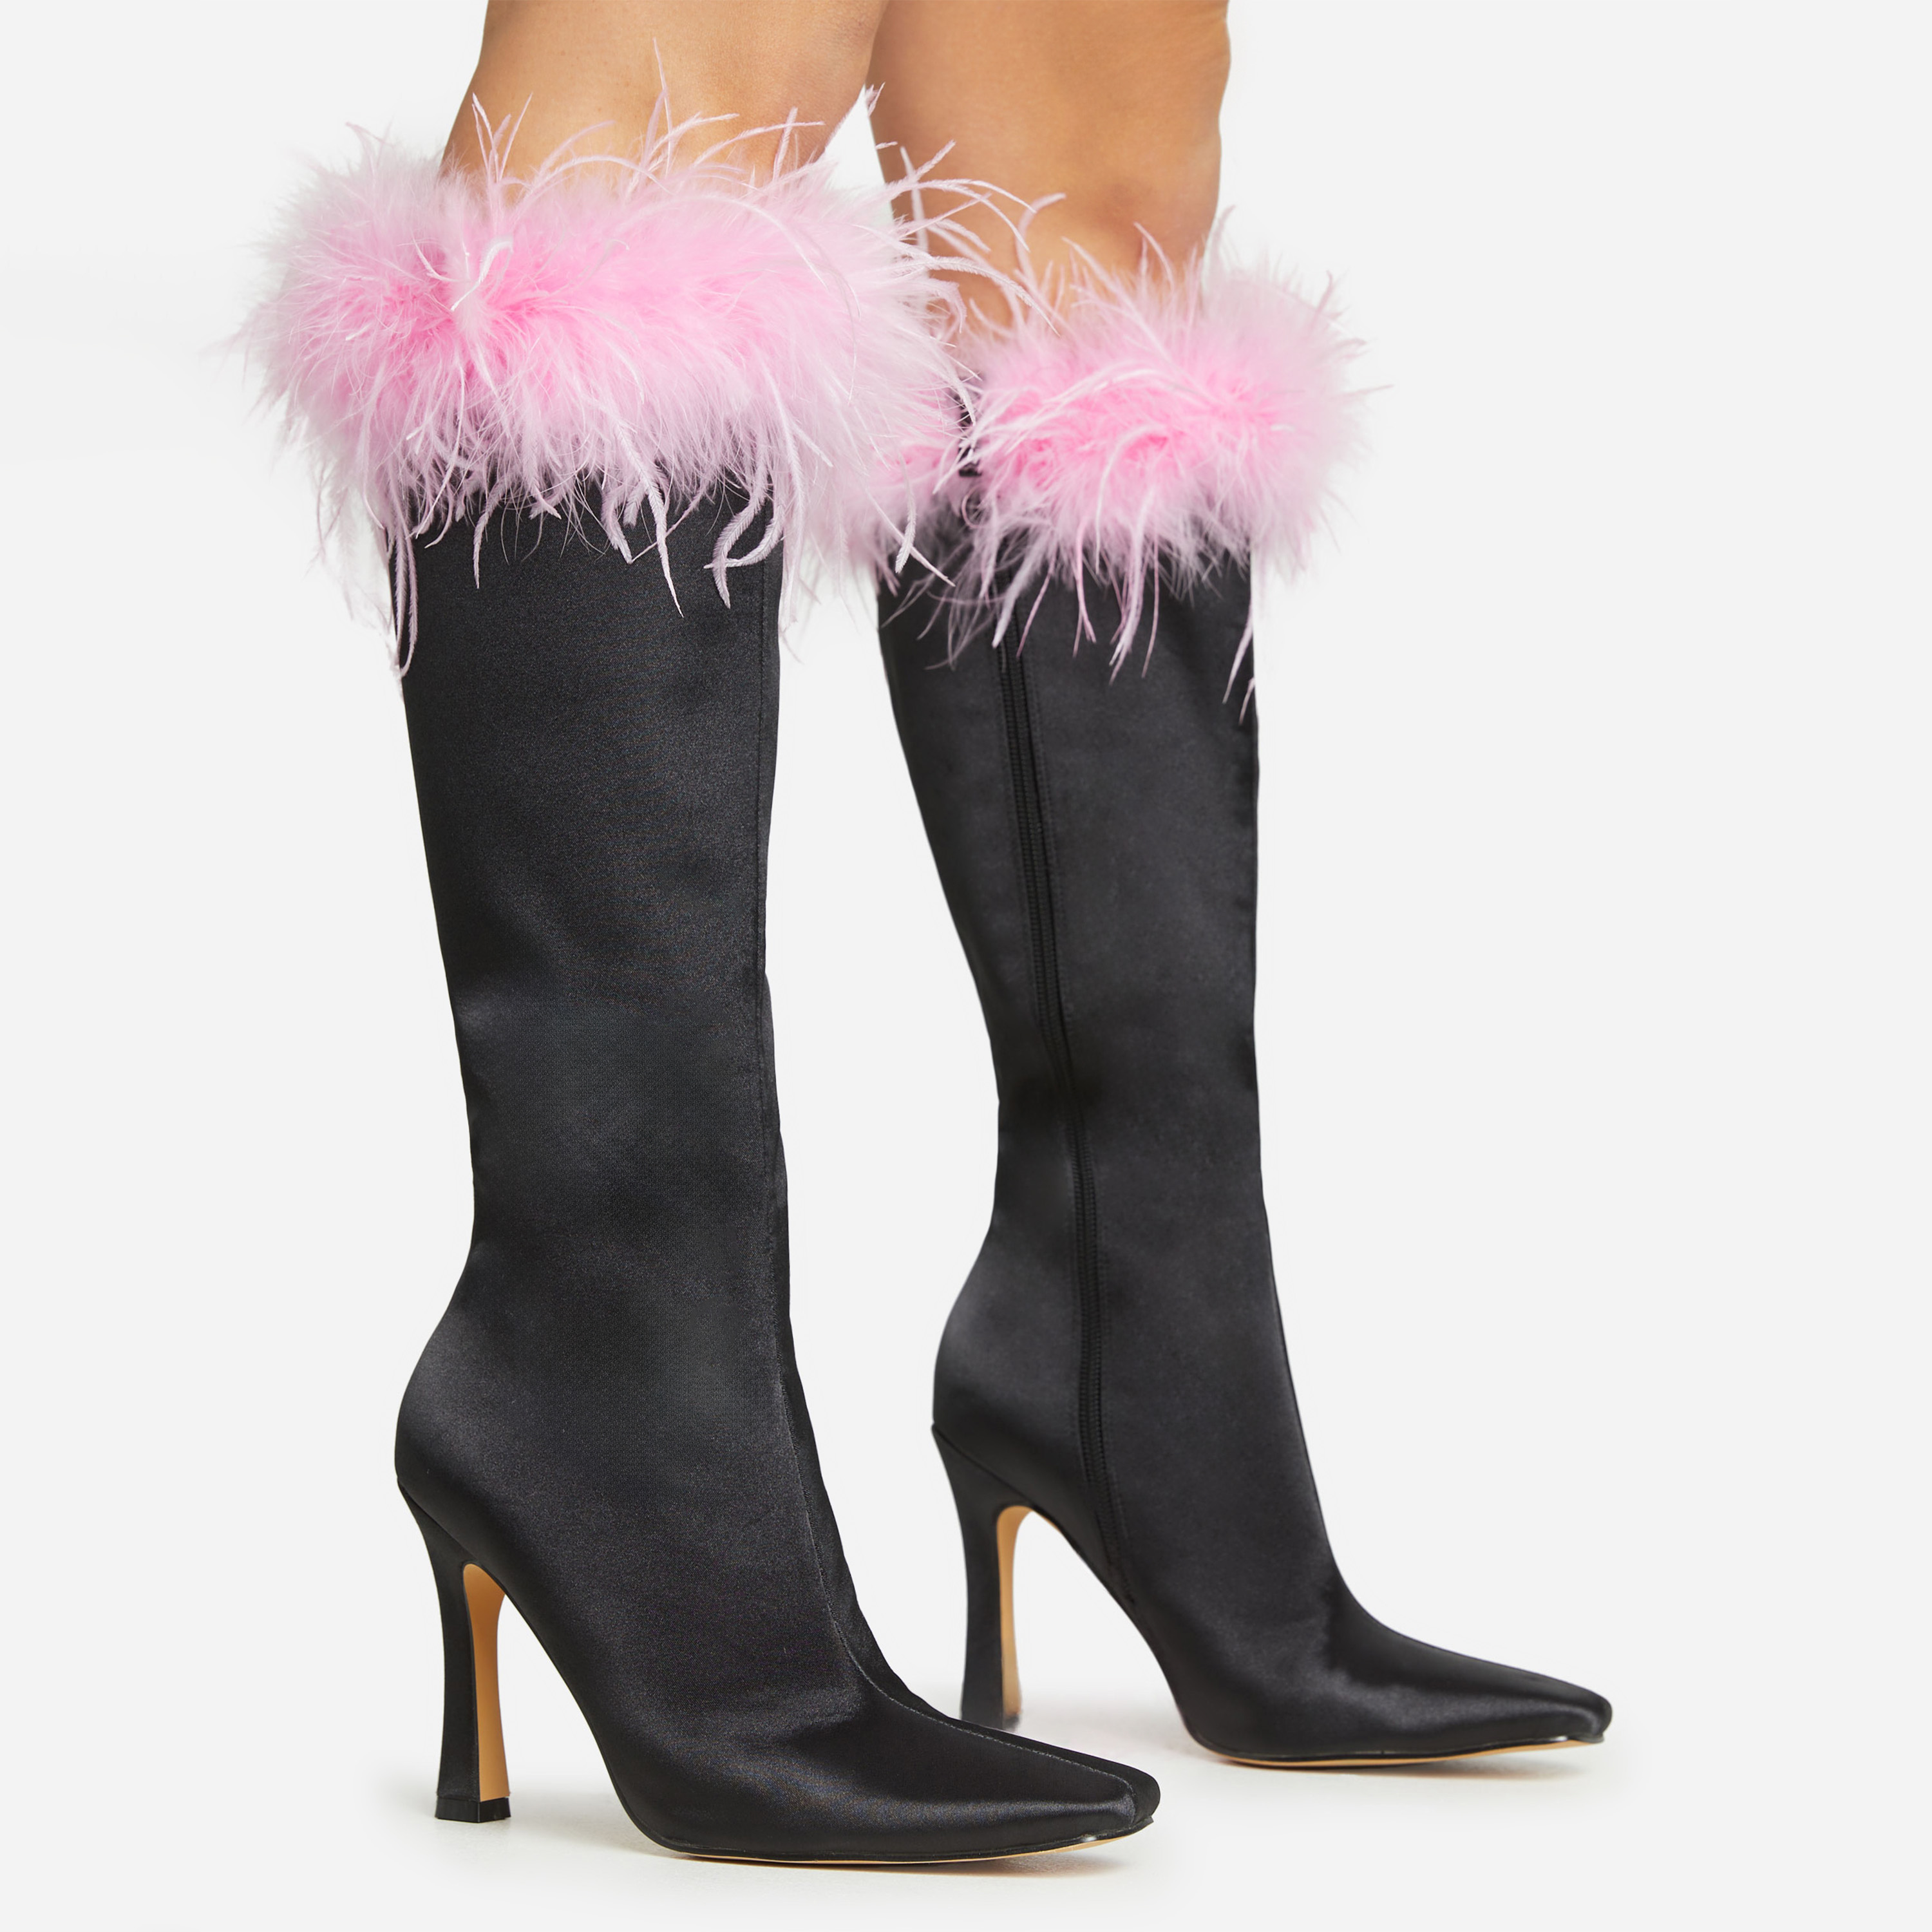 MIRACLE - Pointed Toe Ankle Boot with Fur